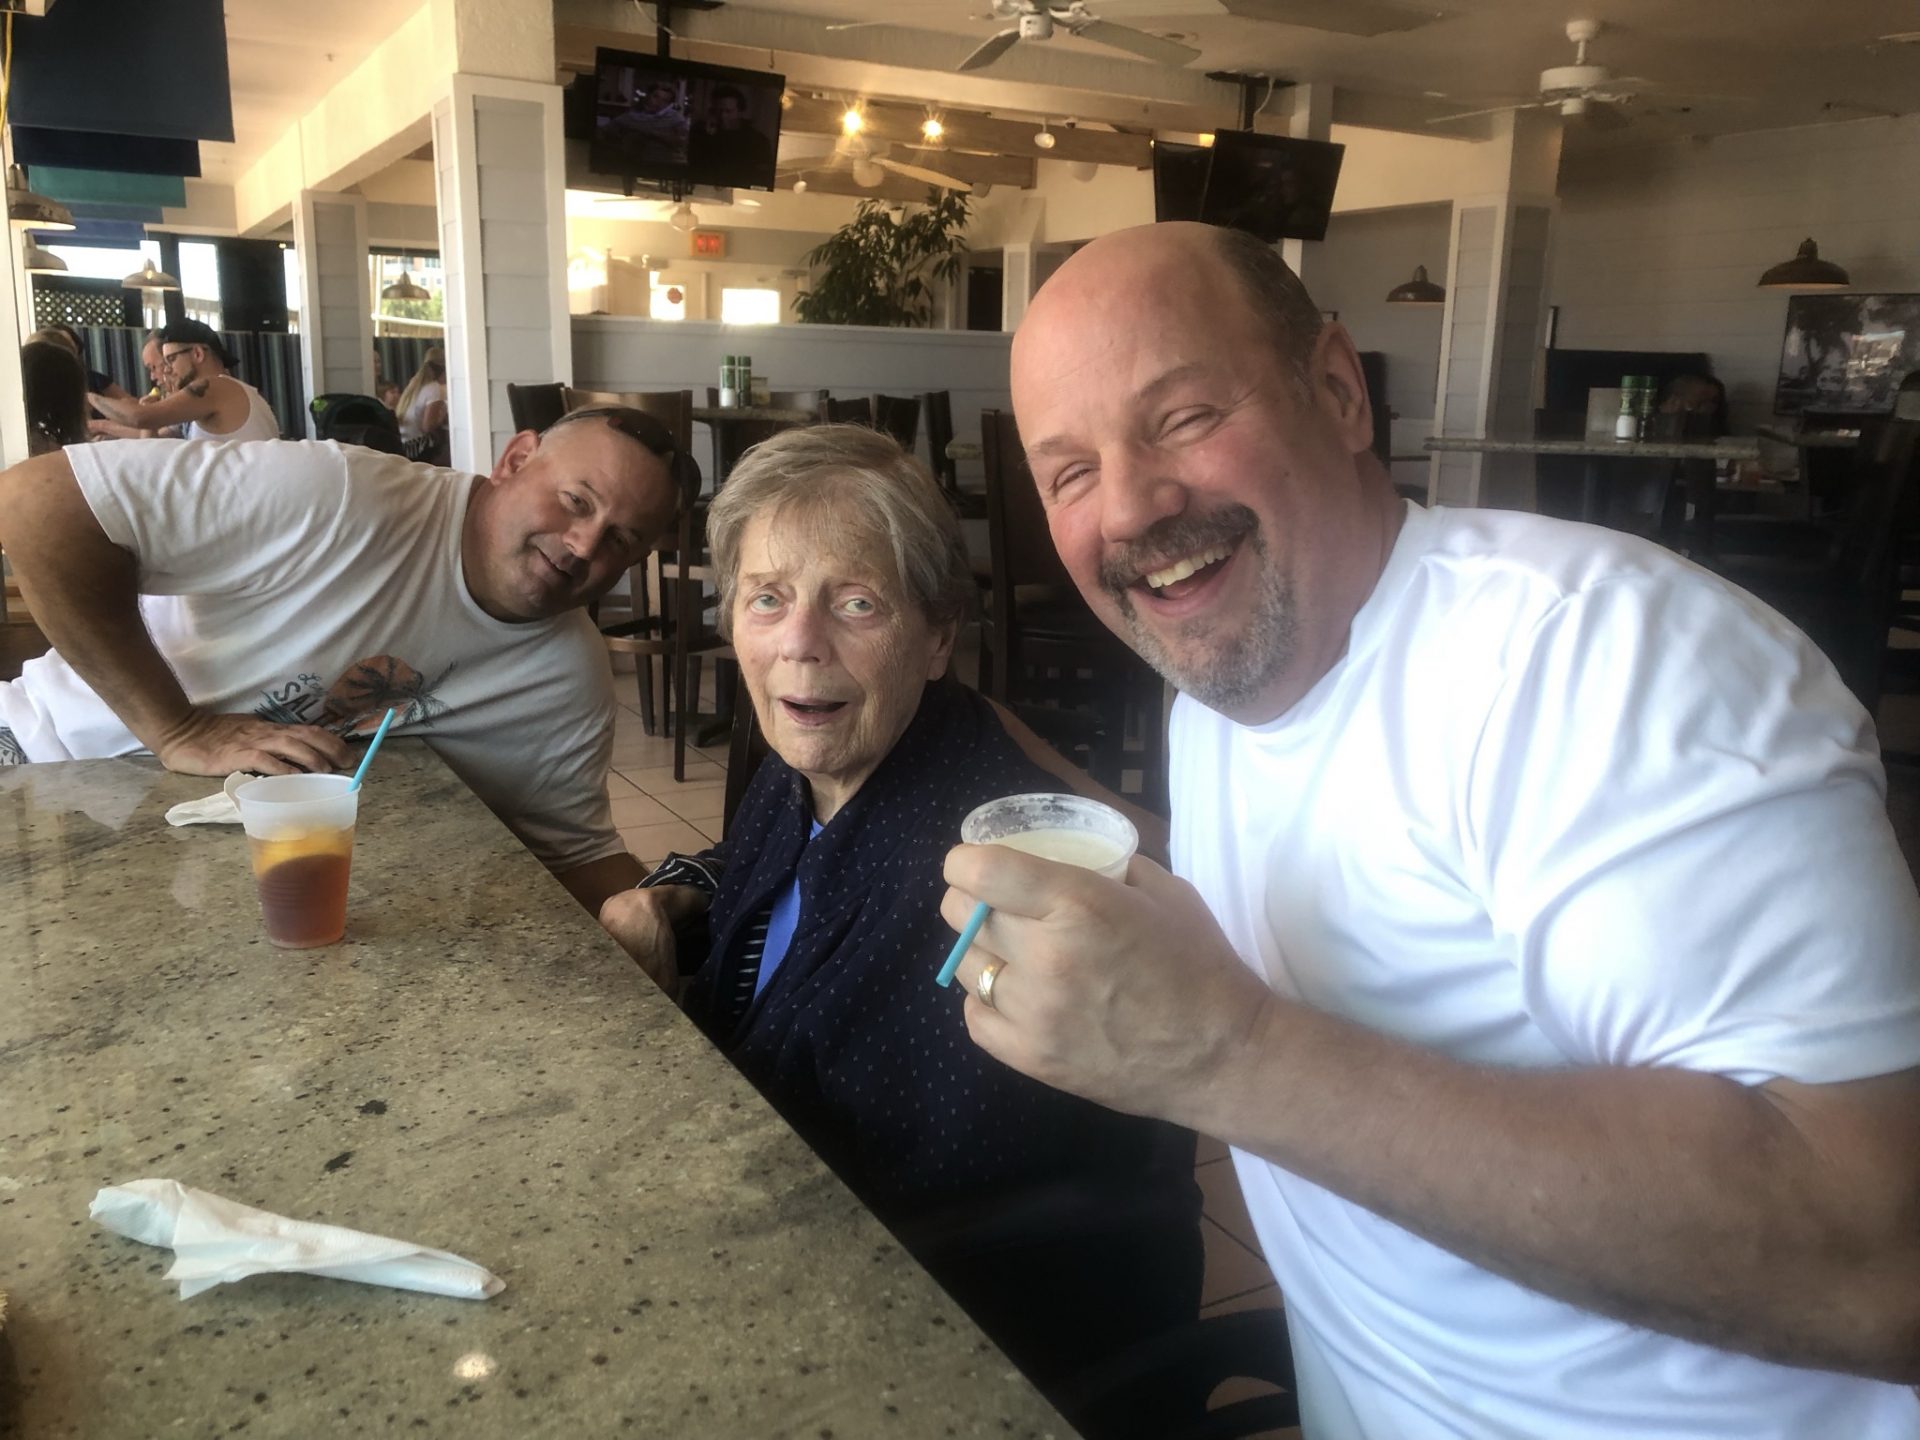 This was a nice time taking her to the beach and partying with hers boys. Phil was taking the picture.  We enjoyed this day together. Marty and Mickey did an amazing job taking care of our mom during the time she was a Floridian!